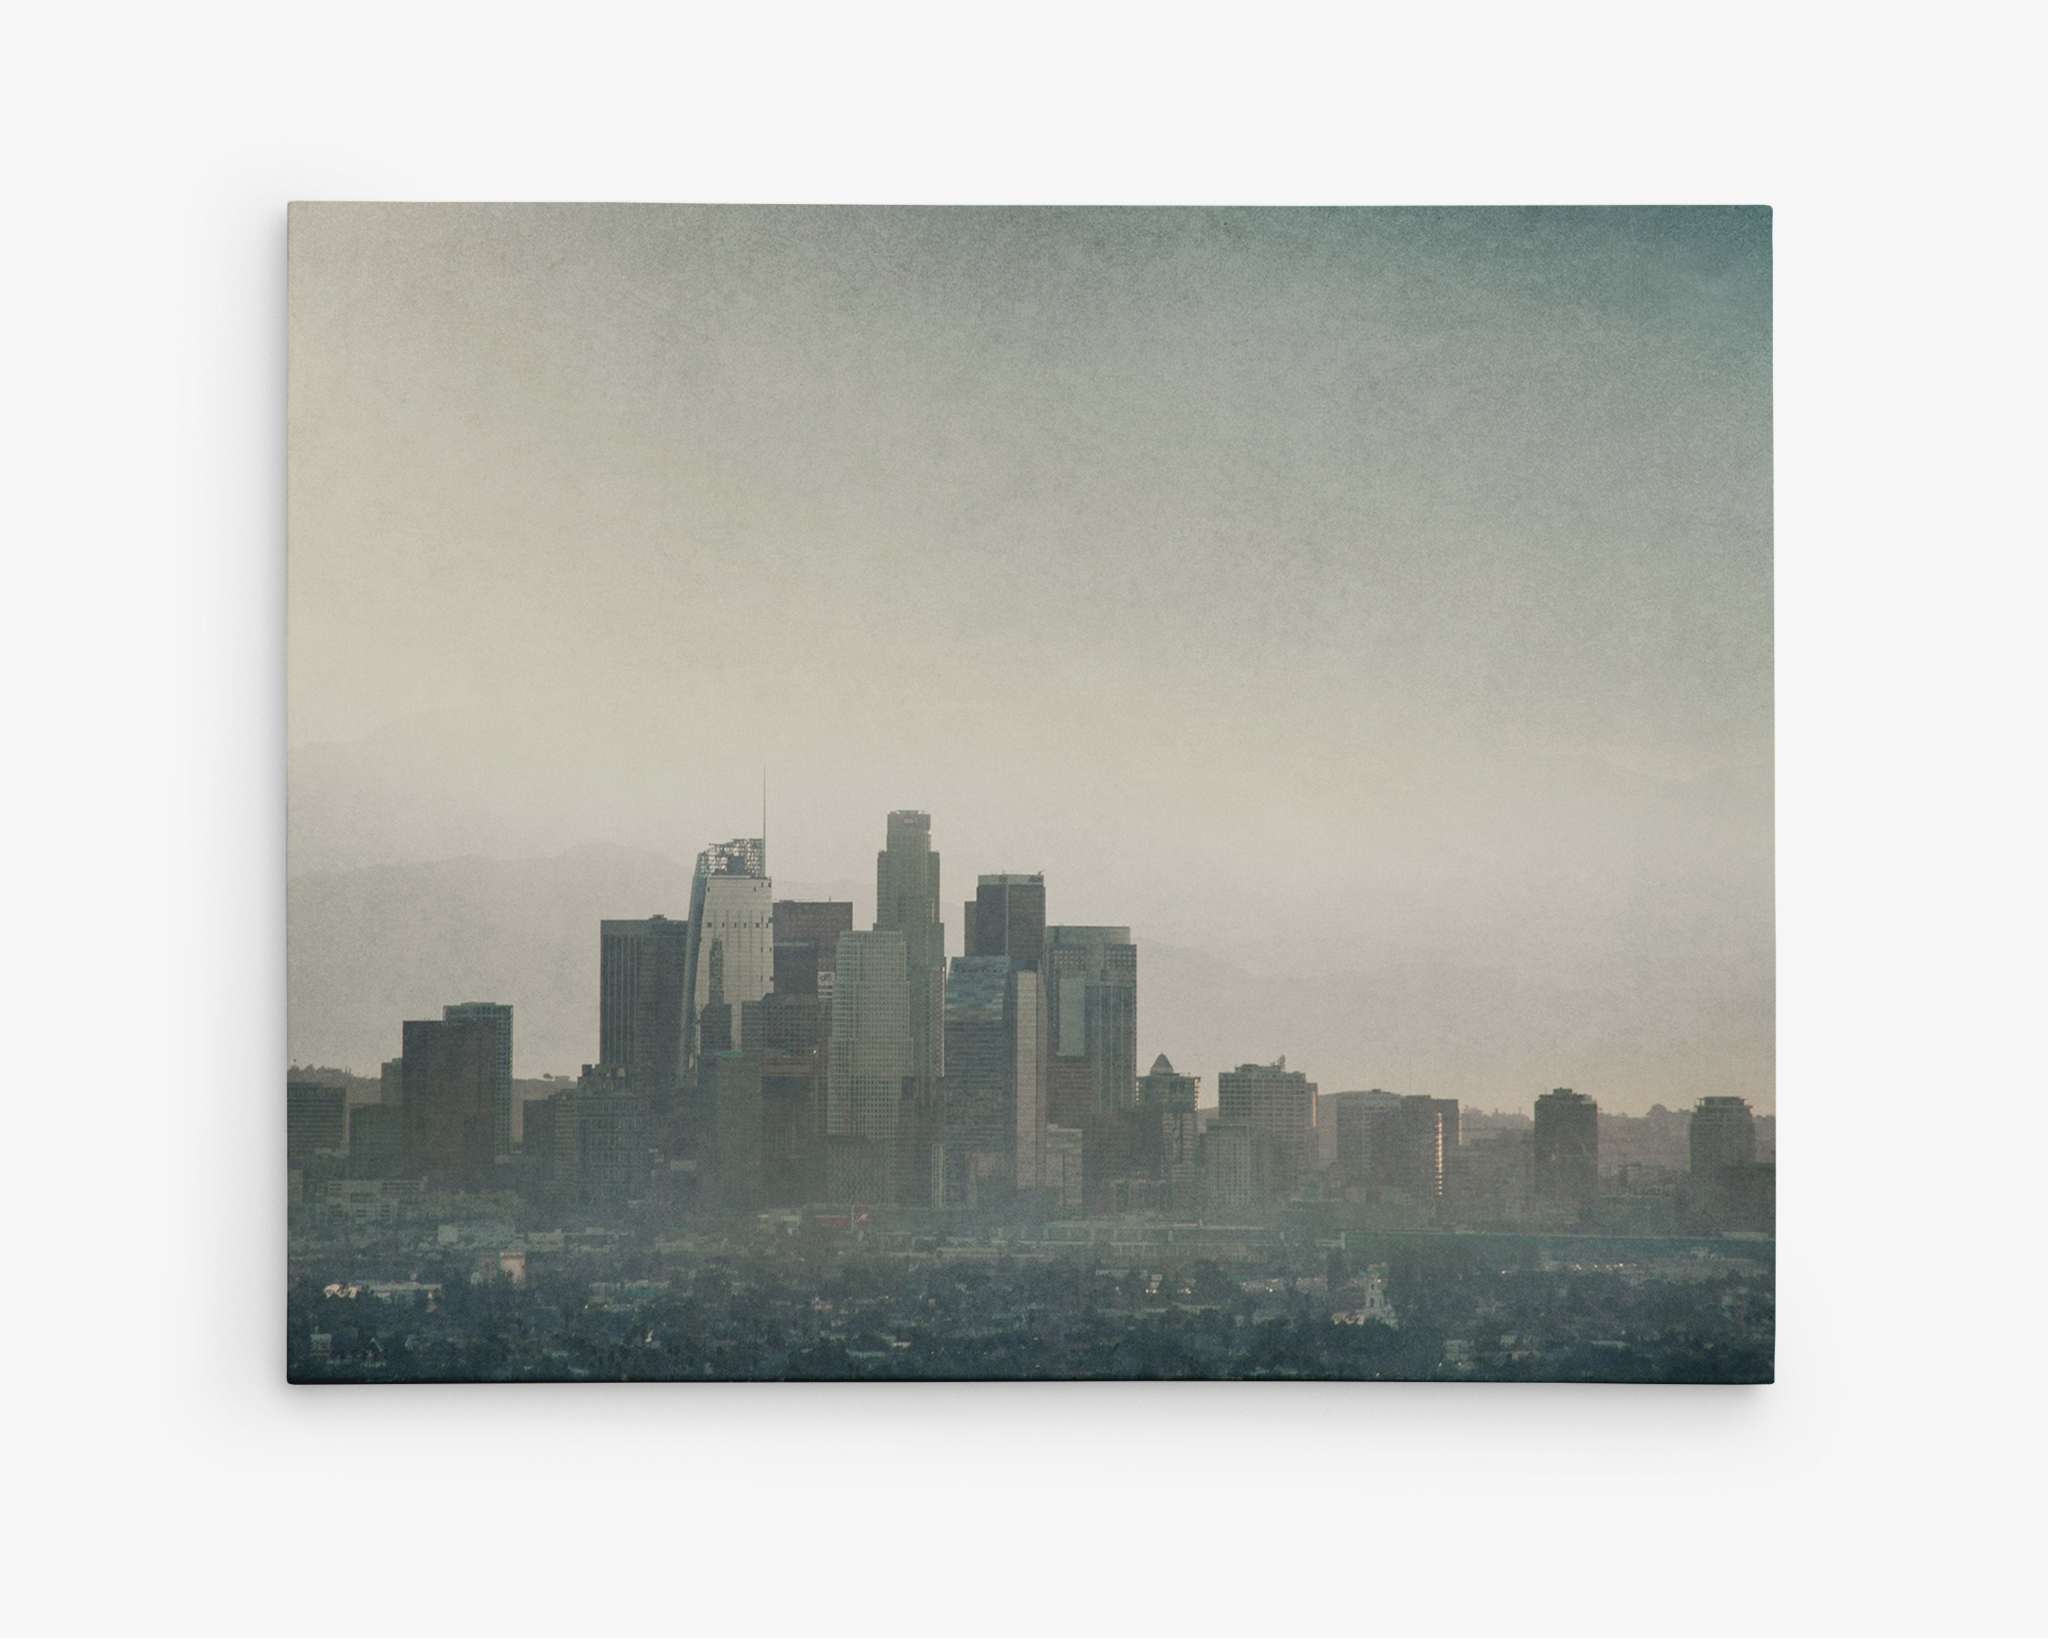 A moody downtown Los Angeles scene unfolds under a slightly hazy sky, with tall skyscrapers dominating the landscape in various heights and designs. Faintly visible through the haze is a mountainous silhouette, captured perfectly on the Downtown Los Angeles Canvas Wall Art, 'Stormy La La Land' by Offley Green for exceptional detail.